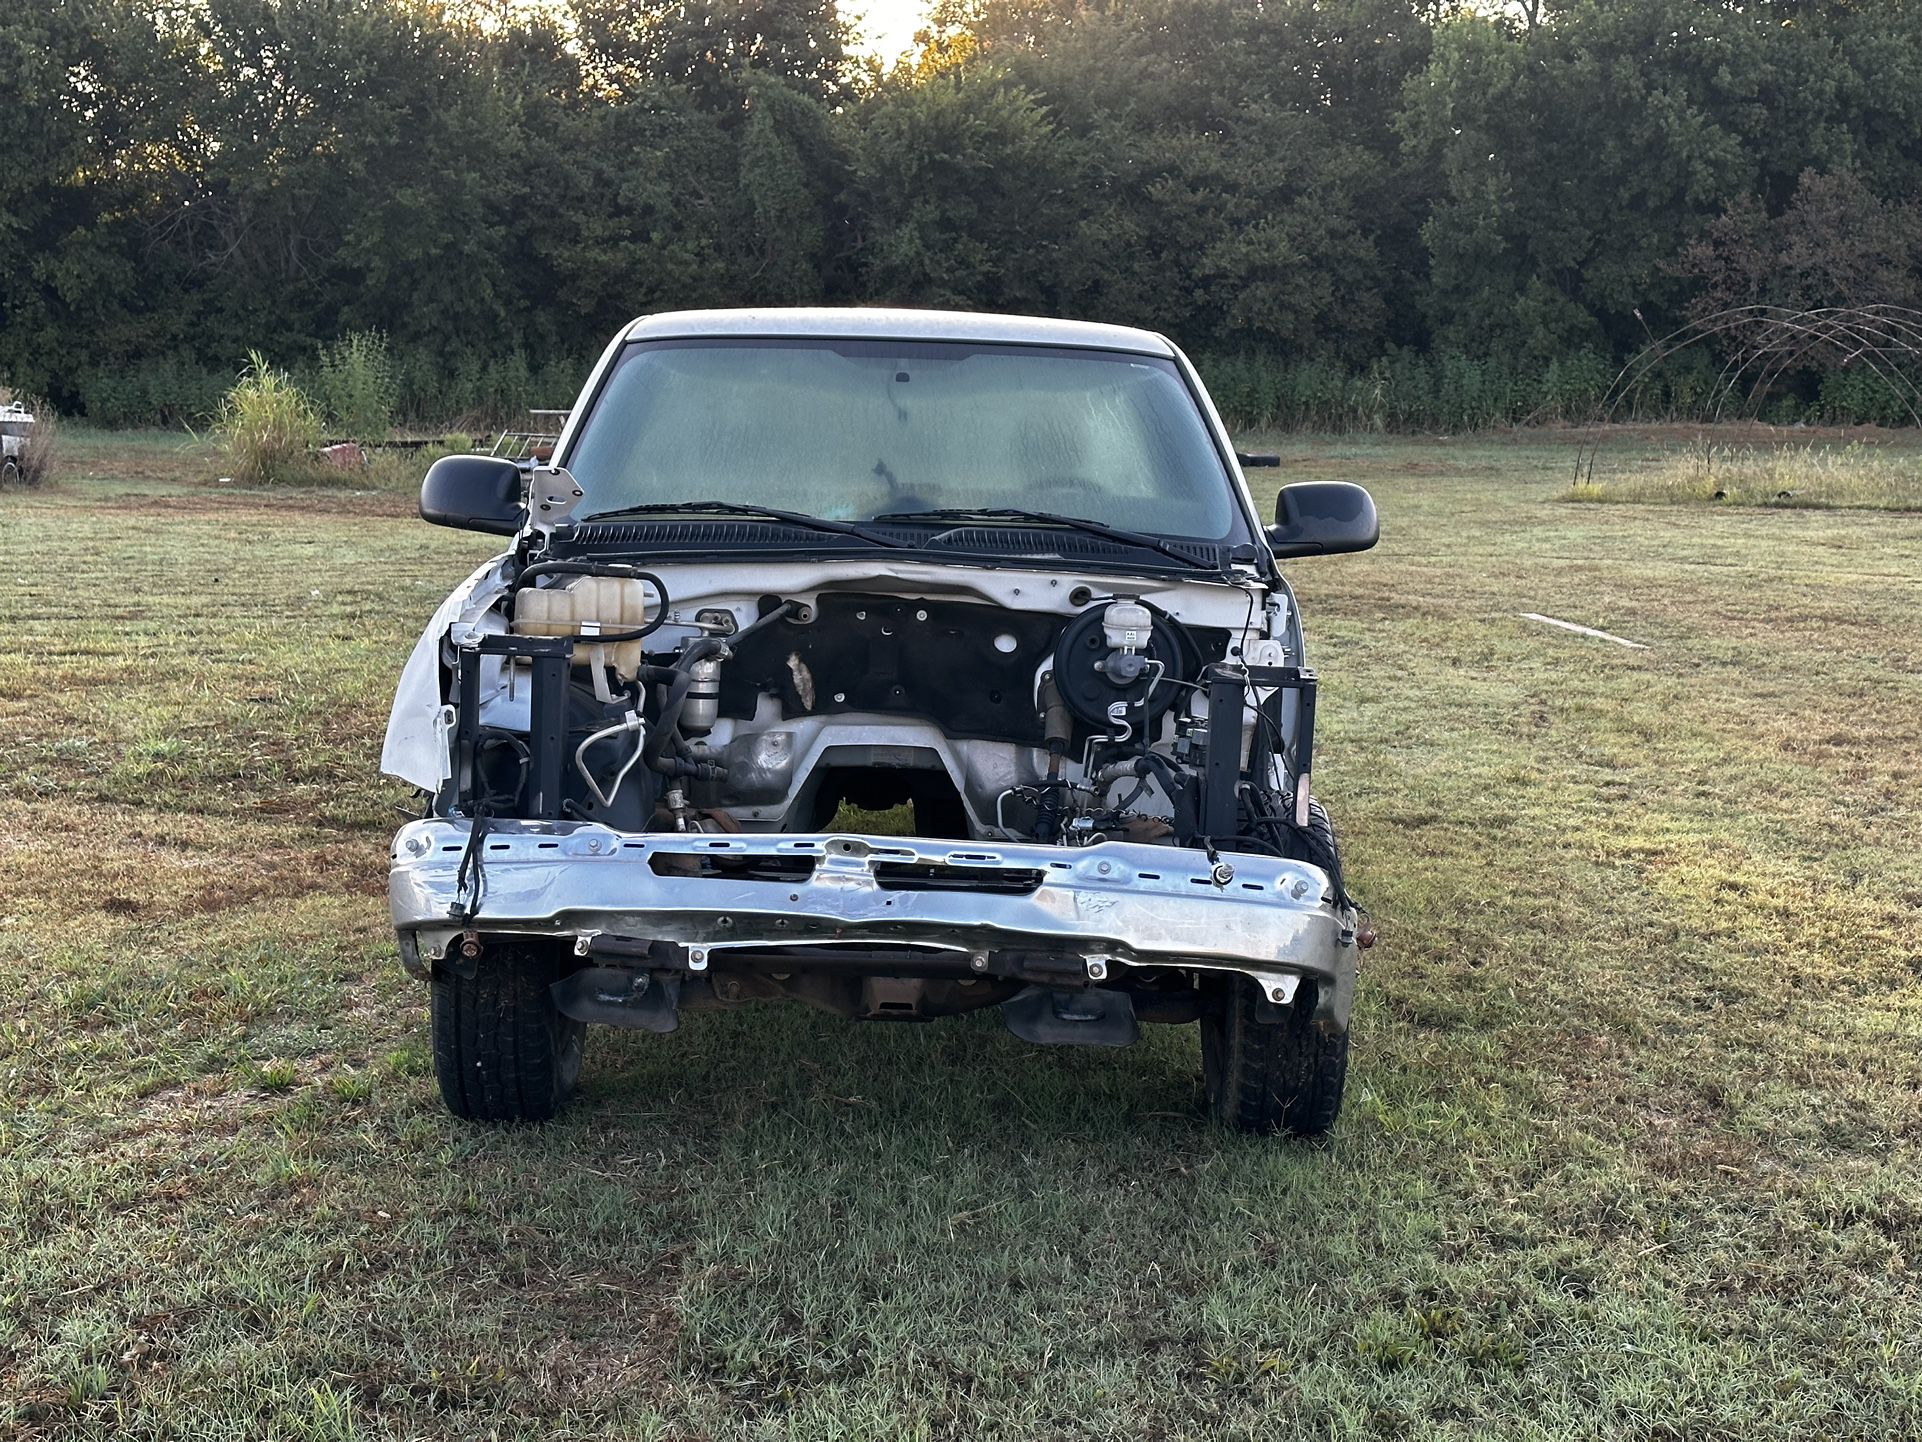 2006 Chevy Parts 